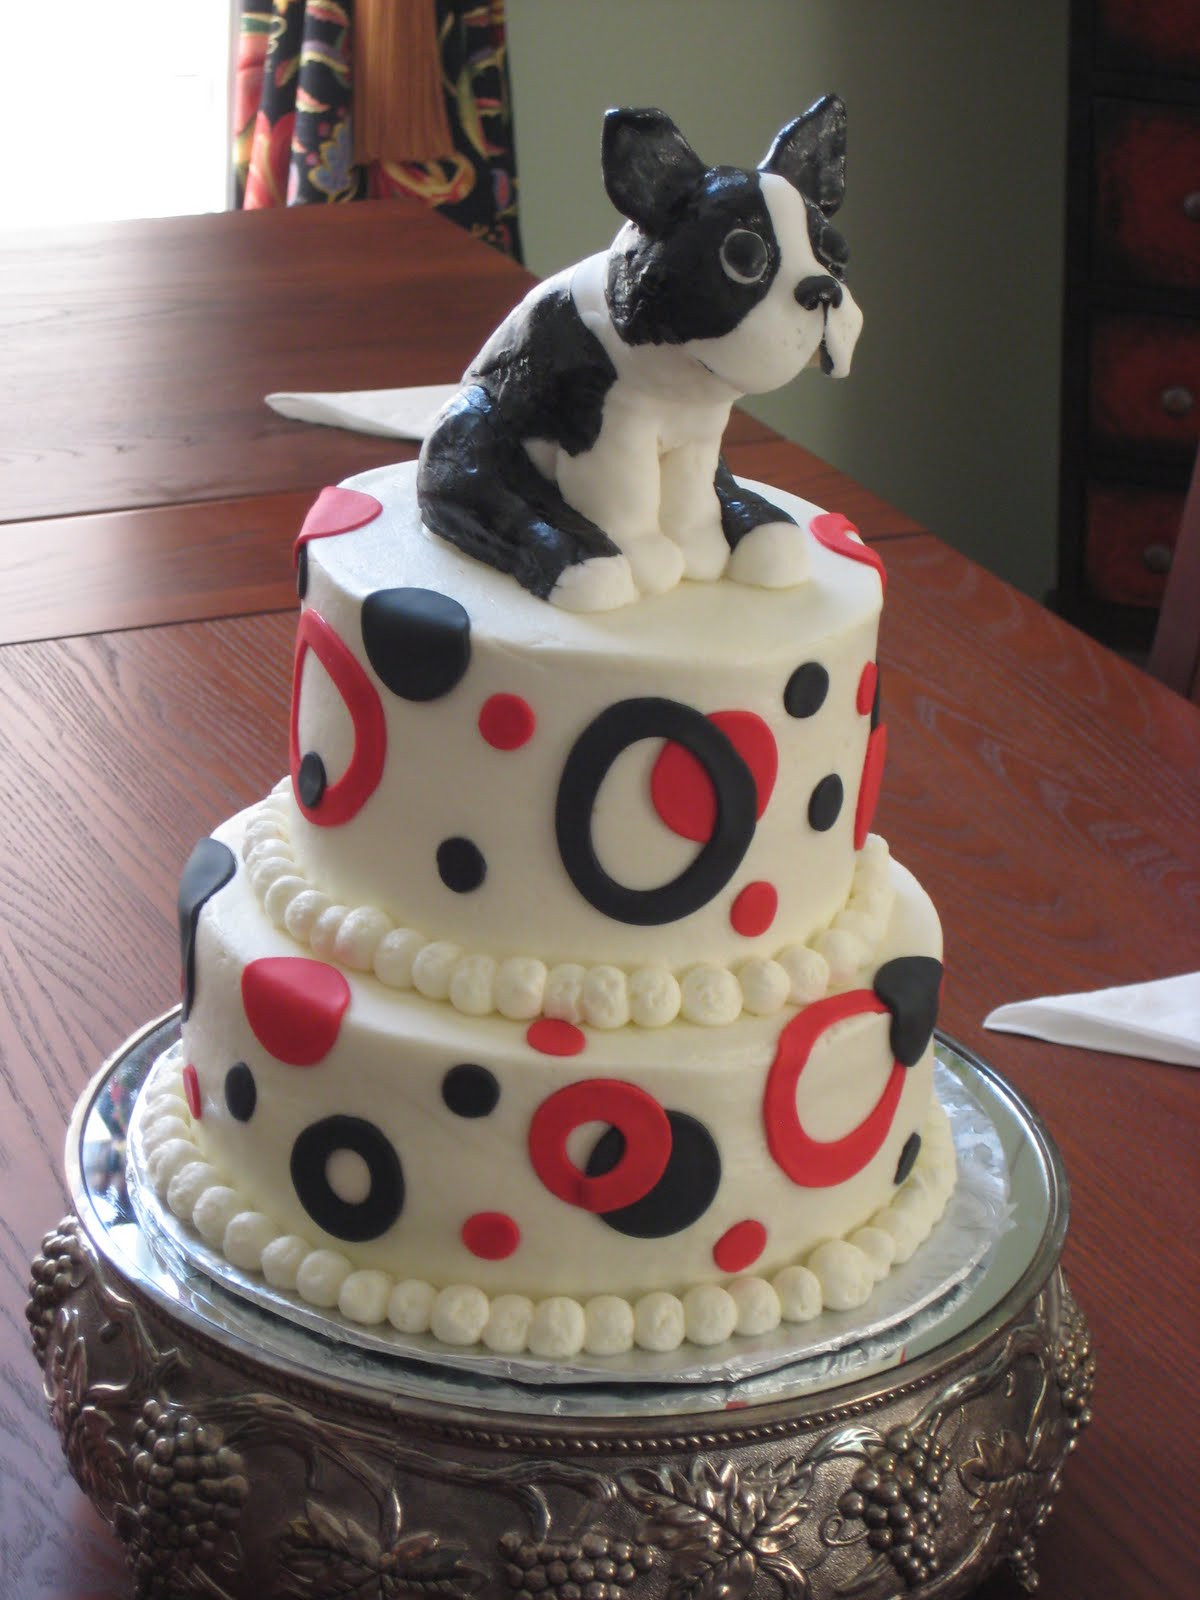 Happy Birthday Cake Picture
 f THe lOvE oF CakE Brothers Boston Terrier Birthday Cake